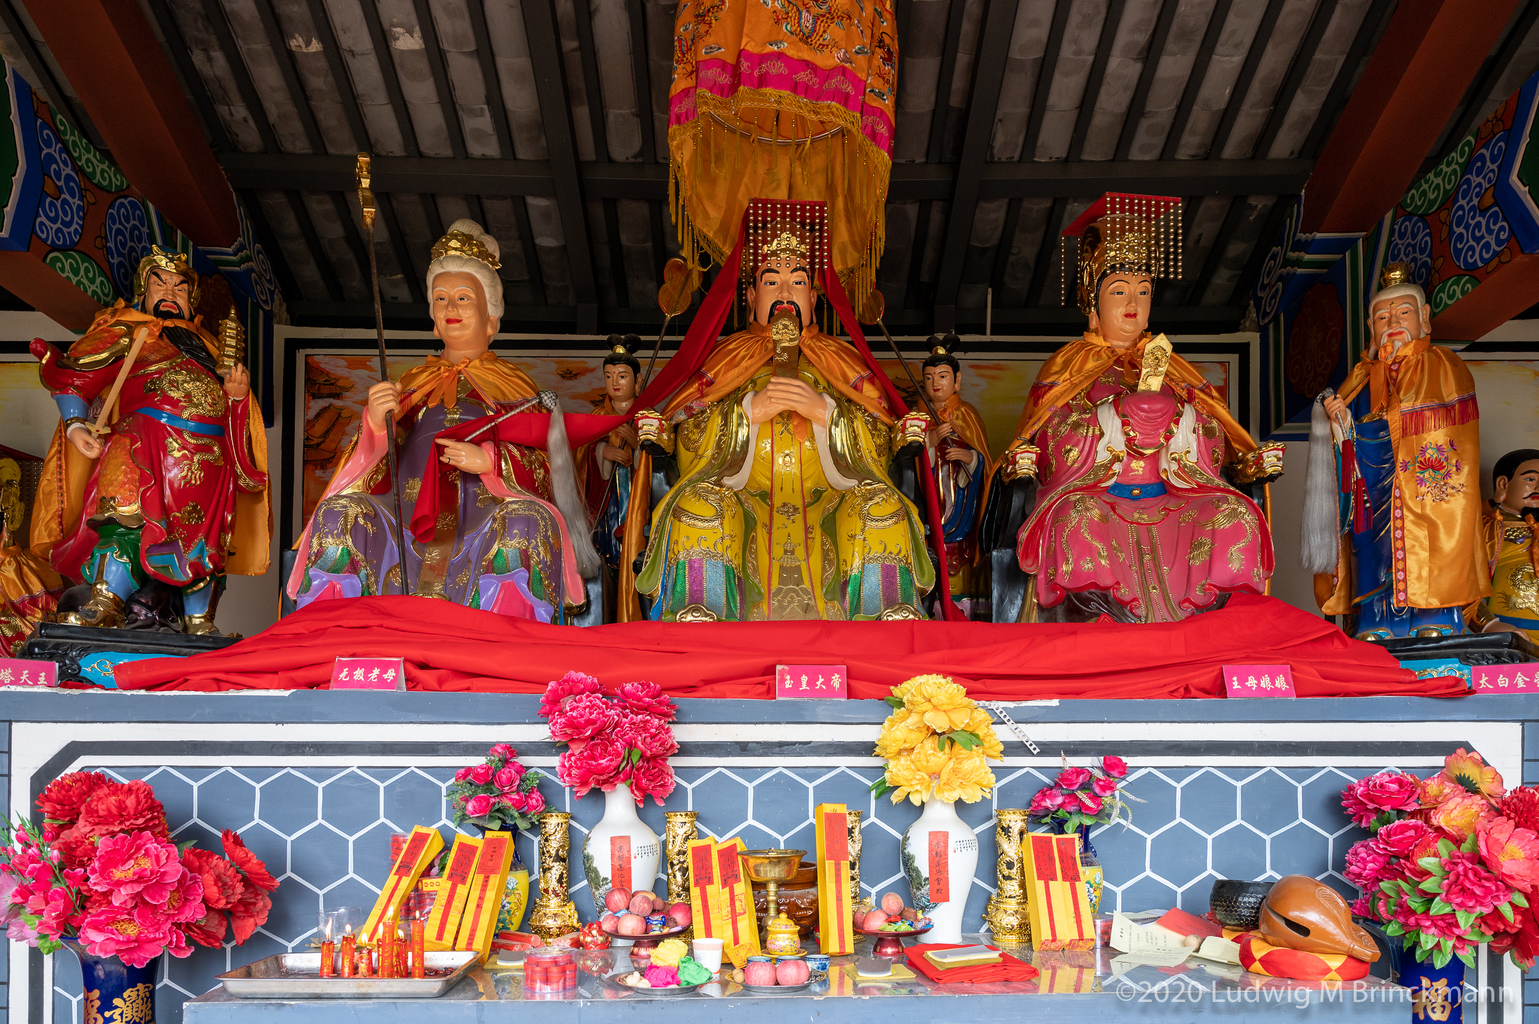 Picture: The family of the Jade Emperor 玉皇 at 唐僧寺.